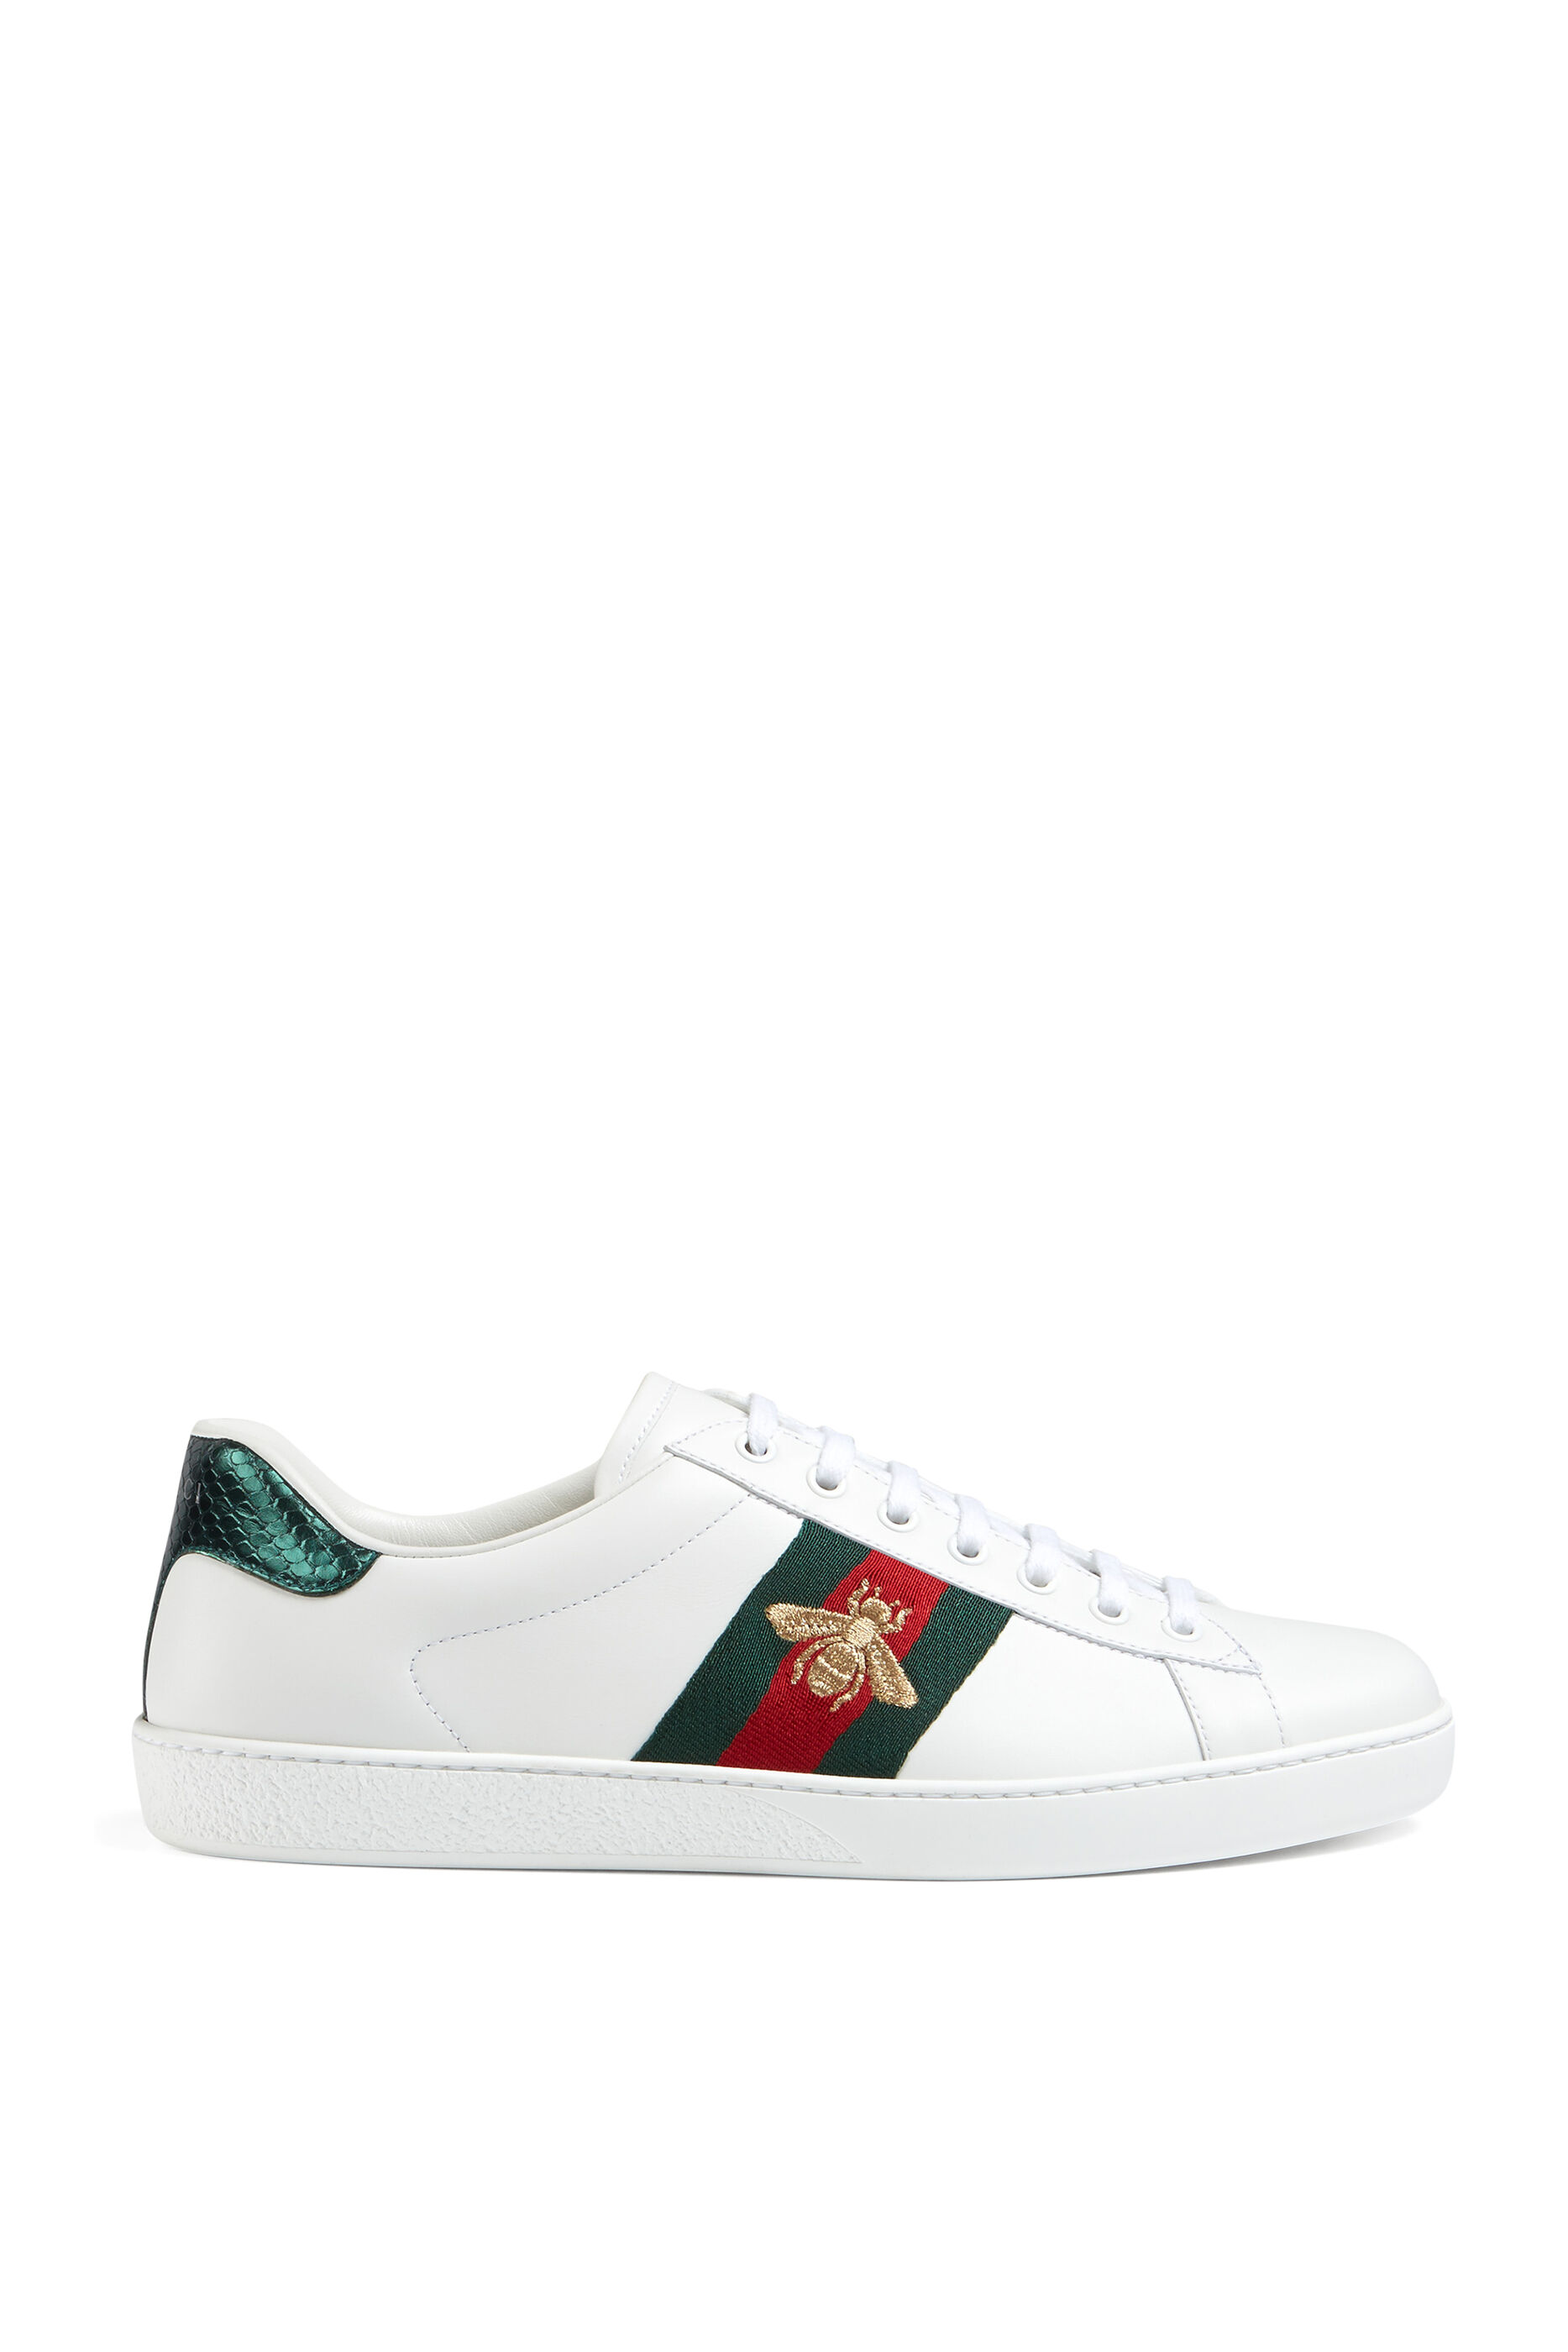 bloomingdale's gucci mens shoes